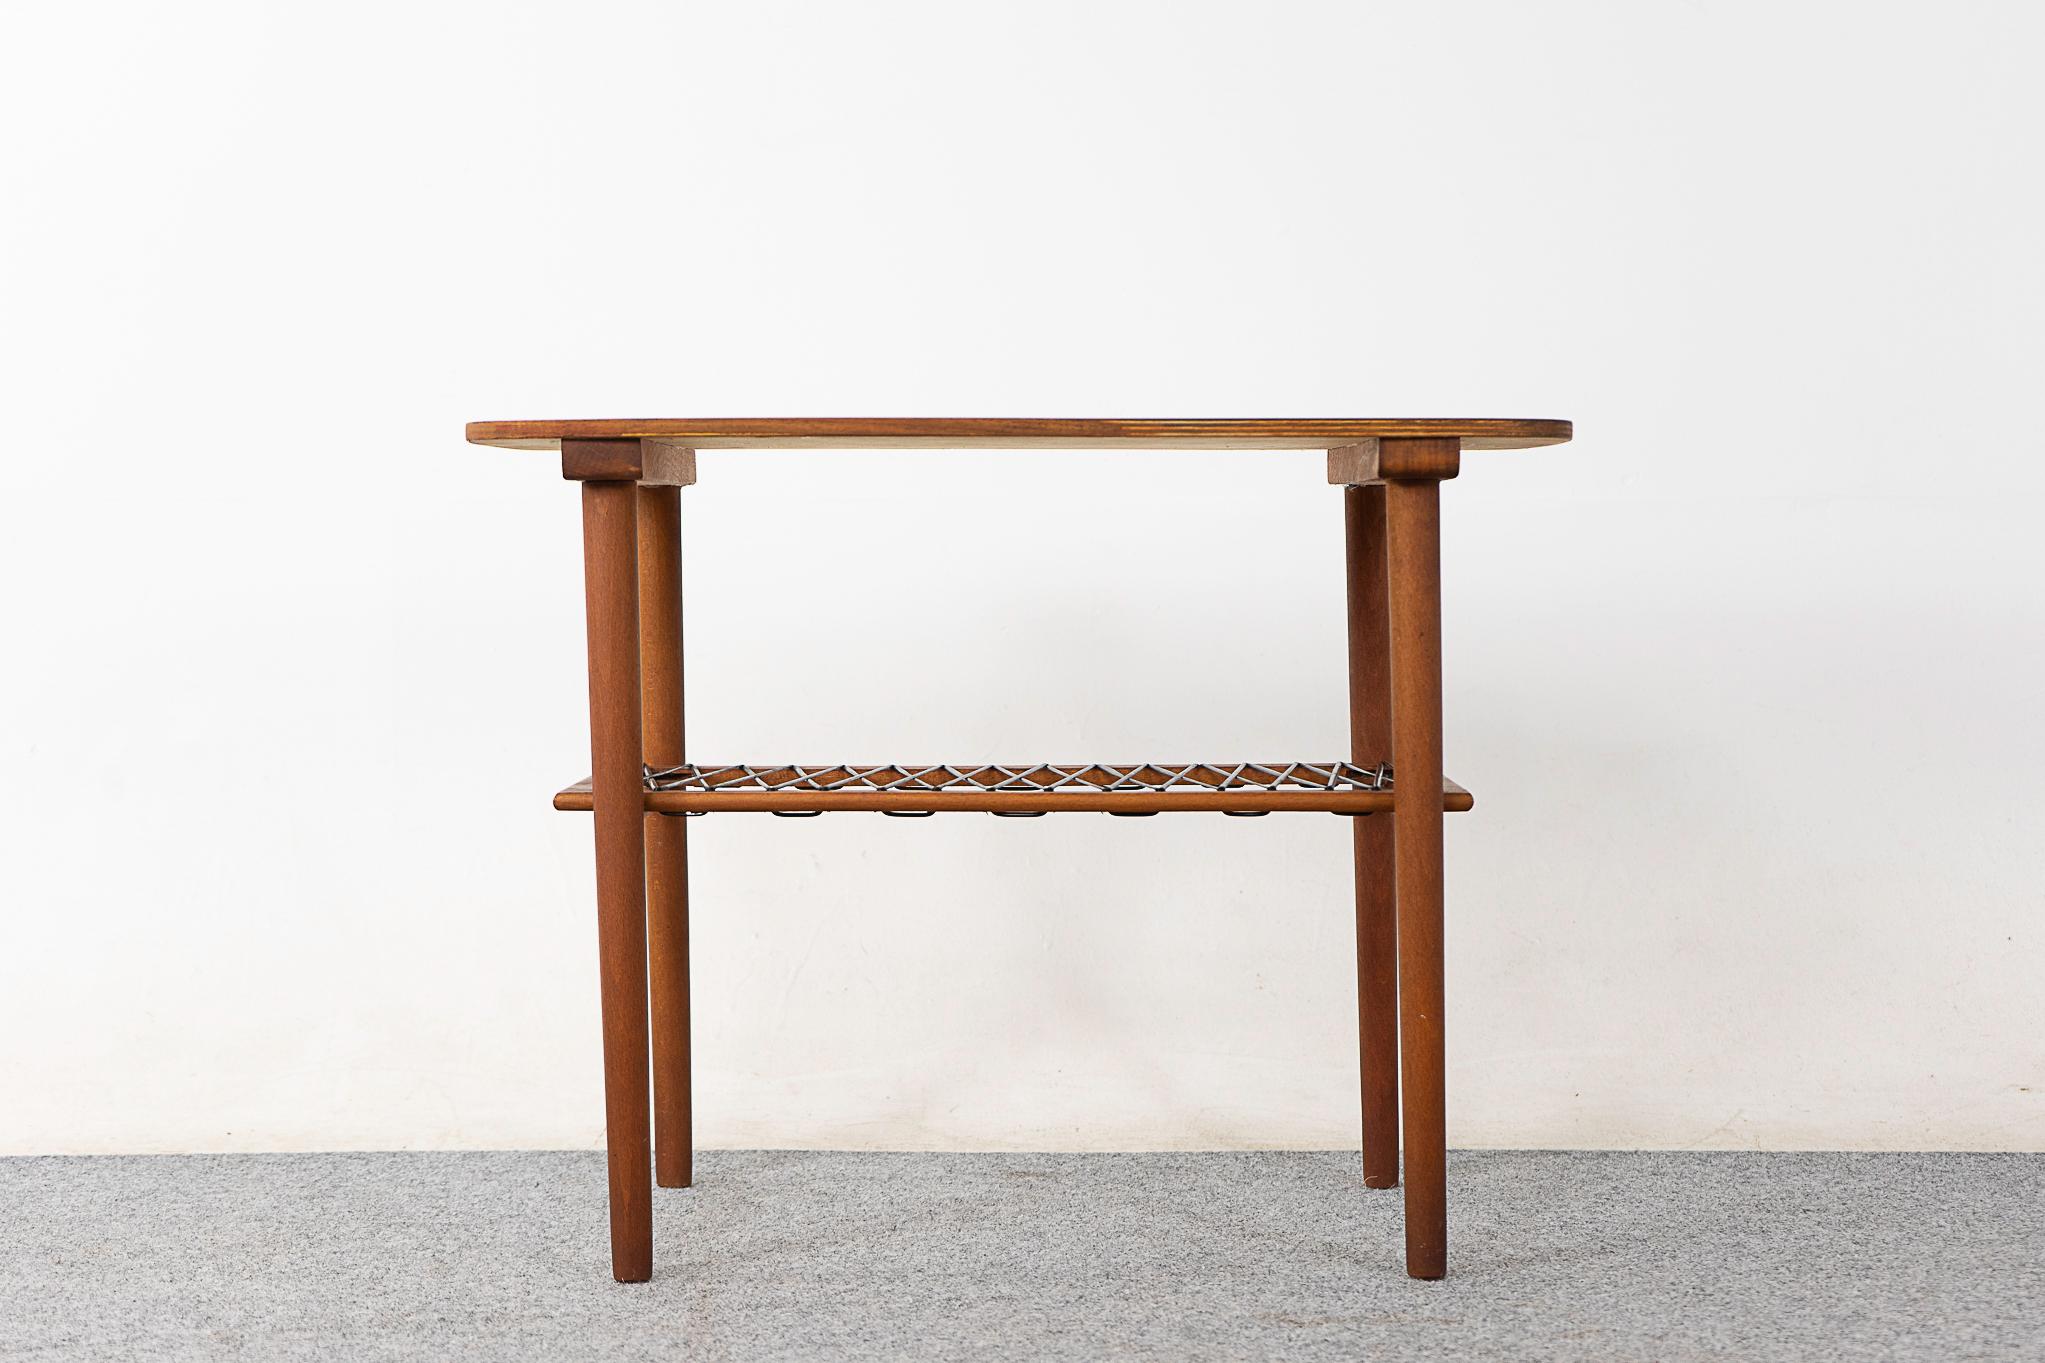 Teak Danish side table, circa 1960's. Lovely rounded rectangle with beautiful warm tone graining patterning. Unique airy woven shelf. Compact, highly functional table work great with lounge chairs or loveseats. 